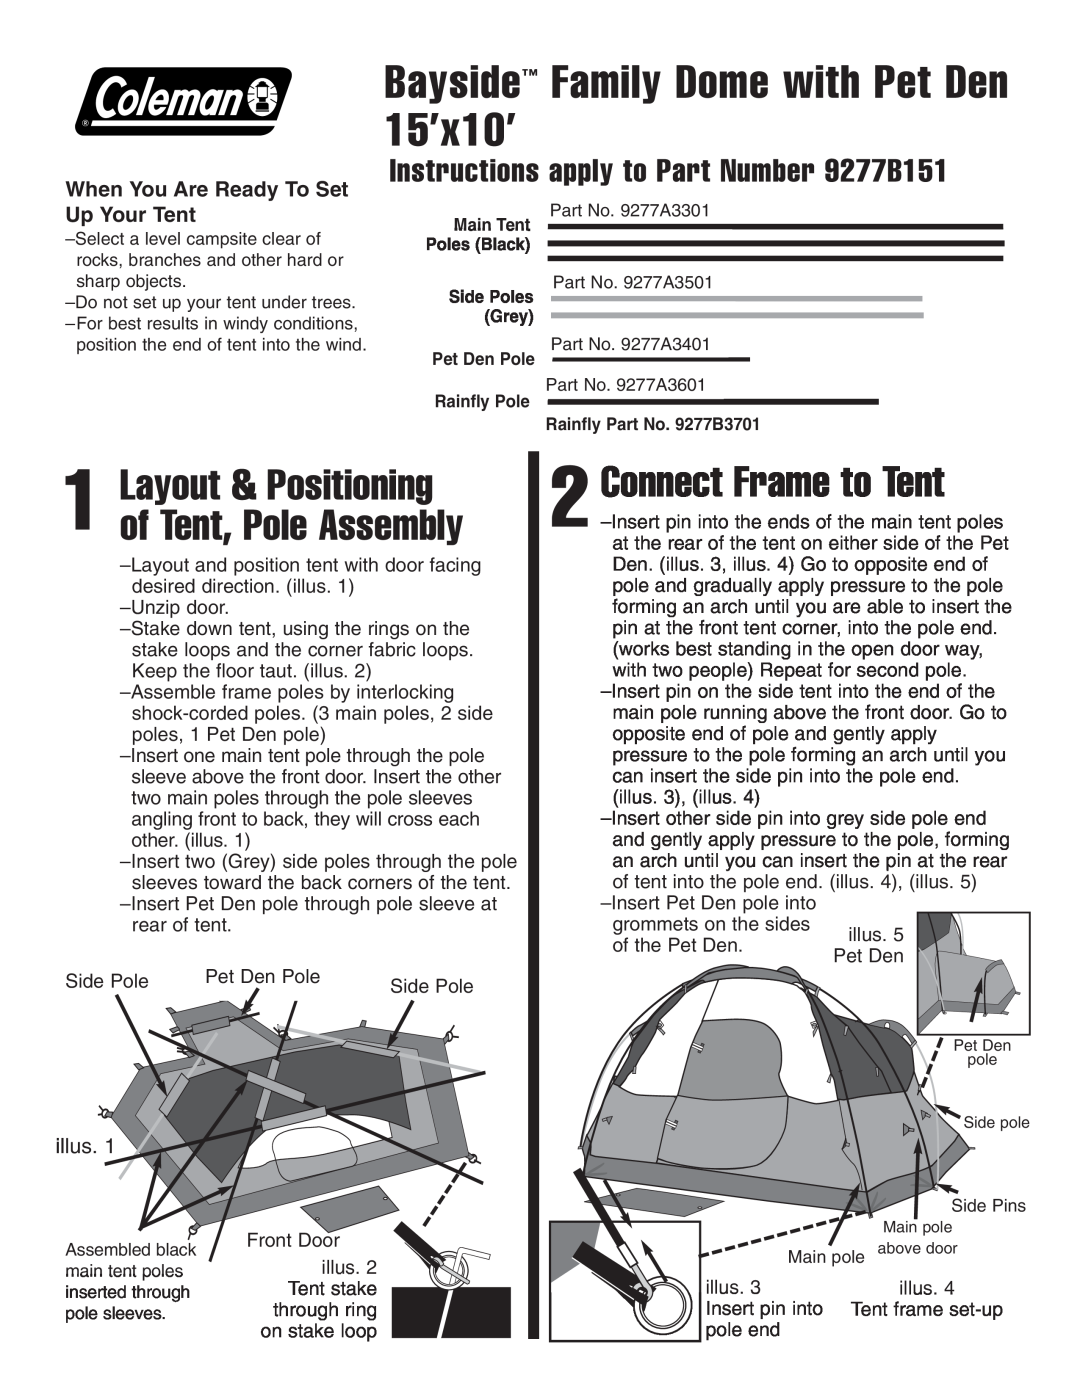 Coleman 9277B151 manual Connect Frame to Tent, When You Are Ready To Set Up Your Tent, illus 